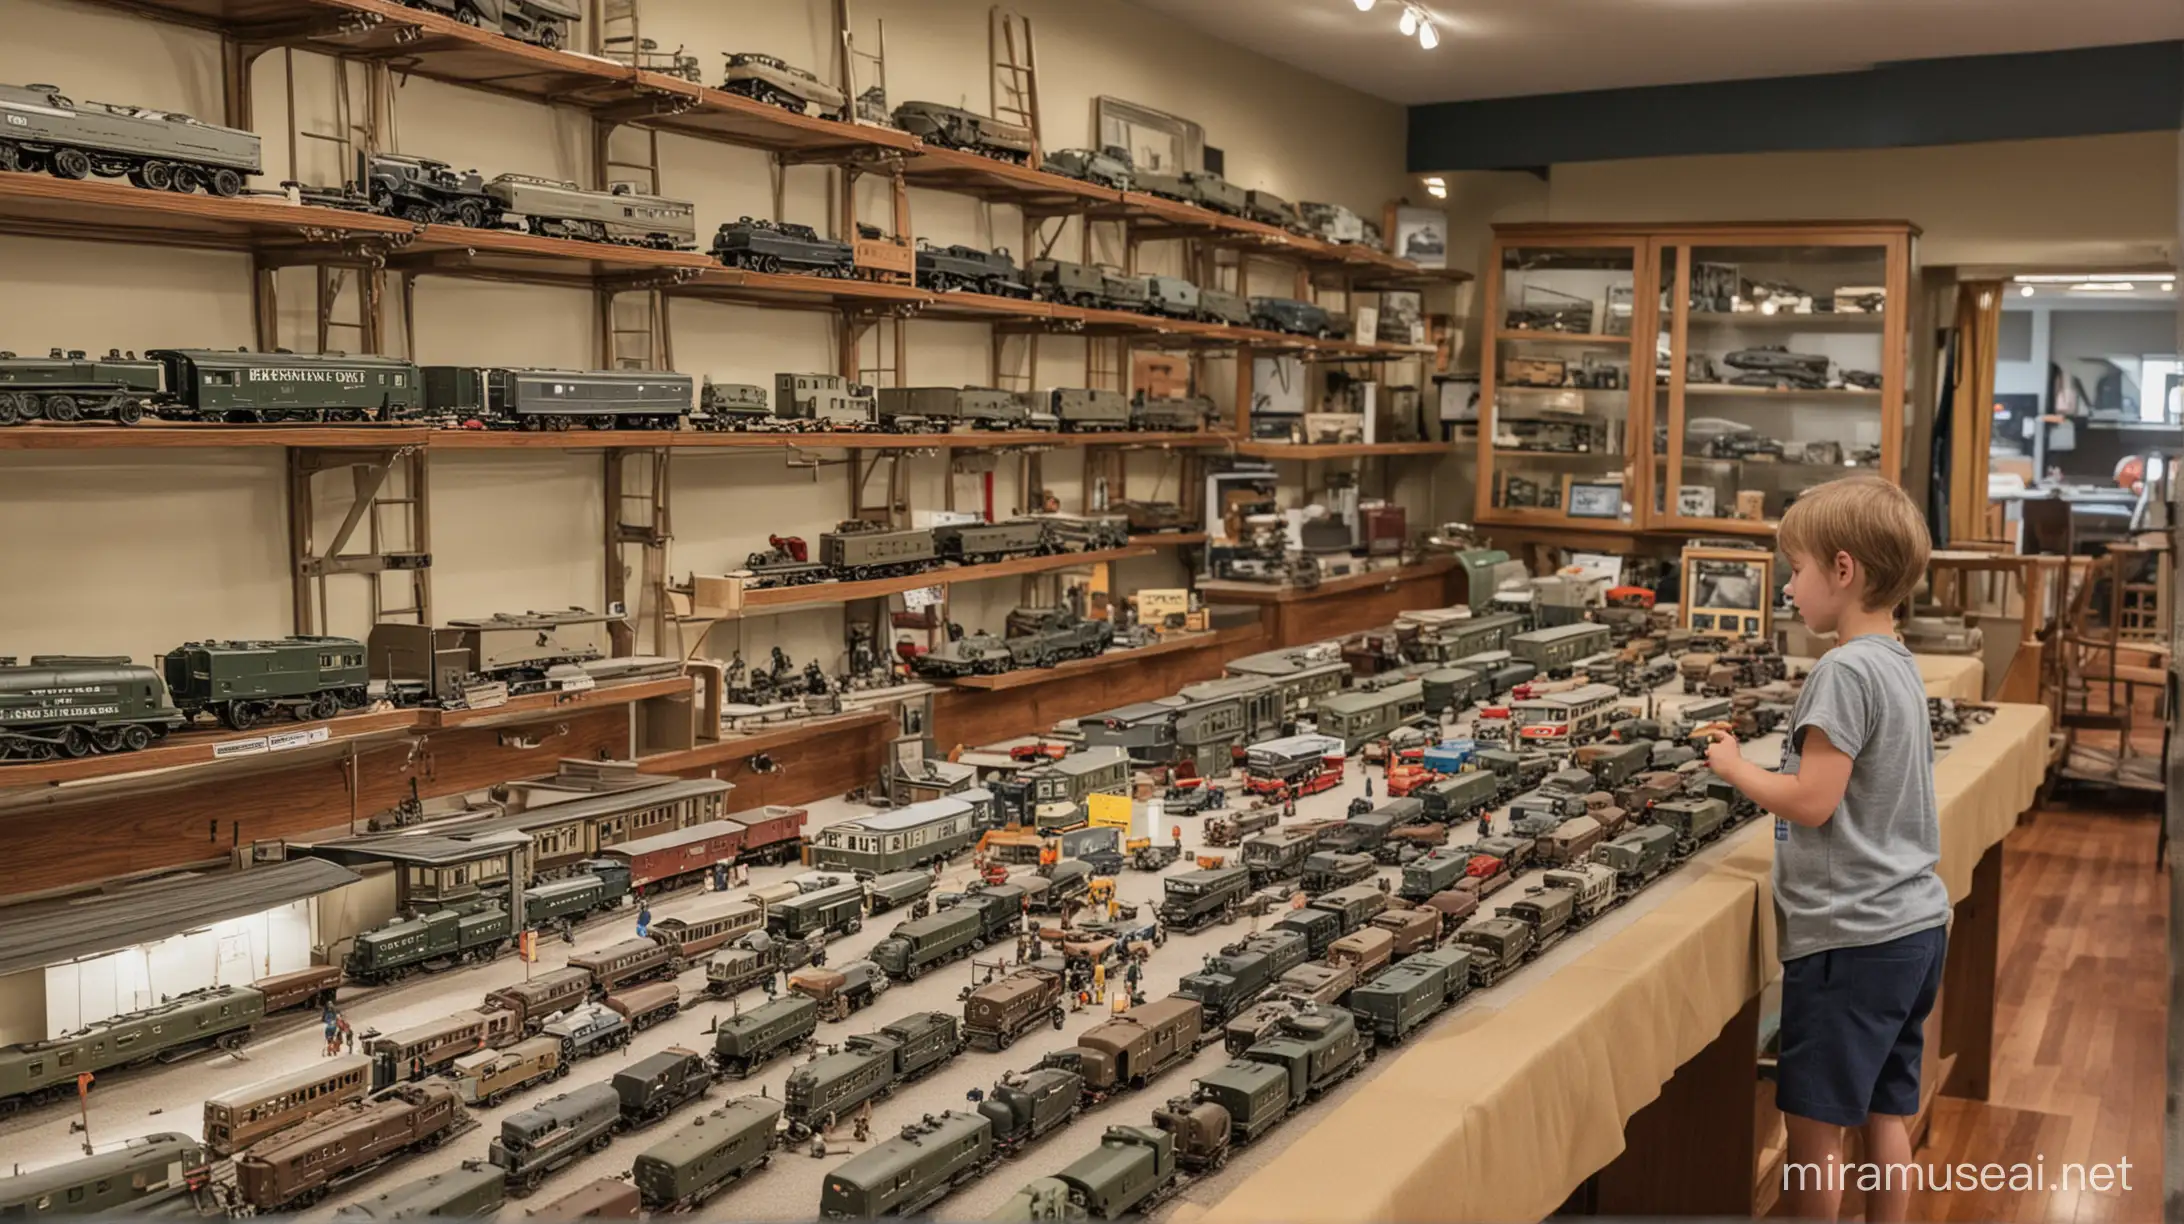 a child is looking into a study while the shelves and display cases on wall full of WWII trains, planes, ships tanks, and houses models in the background